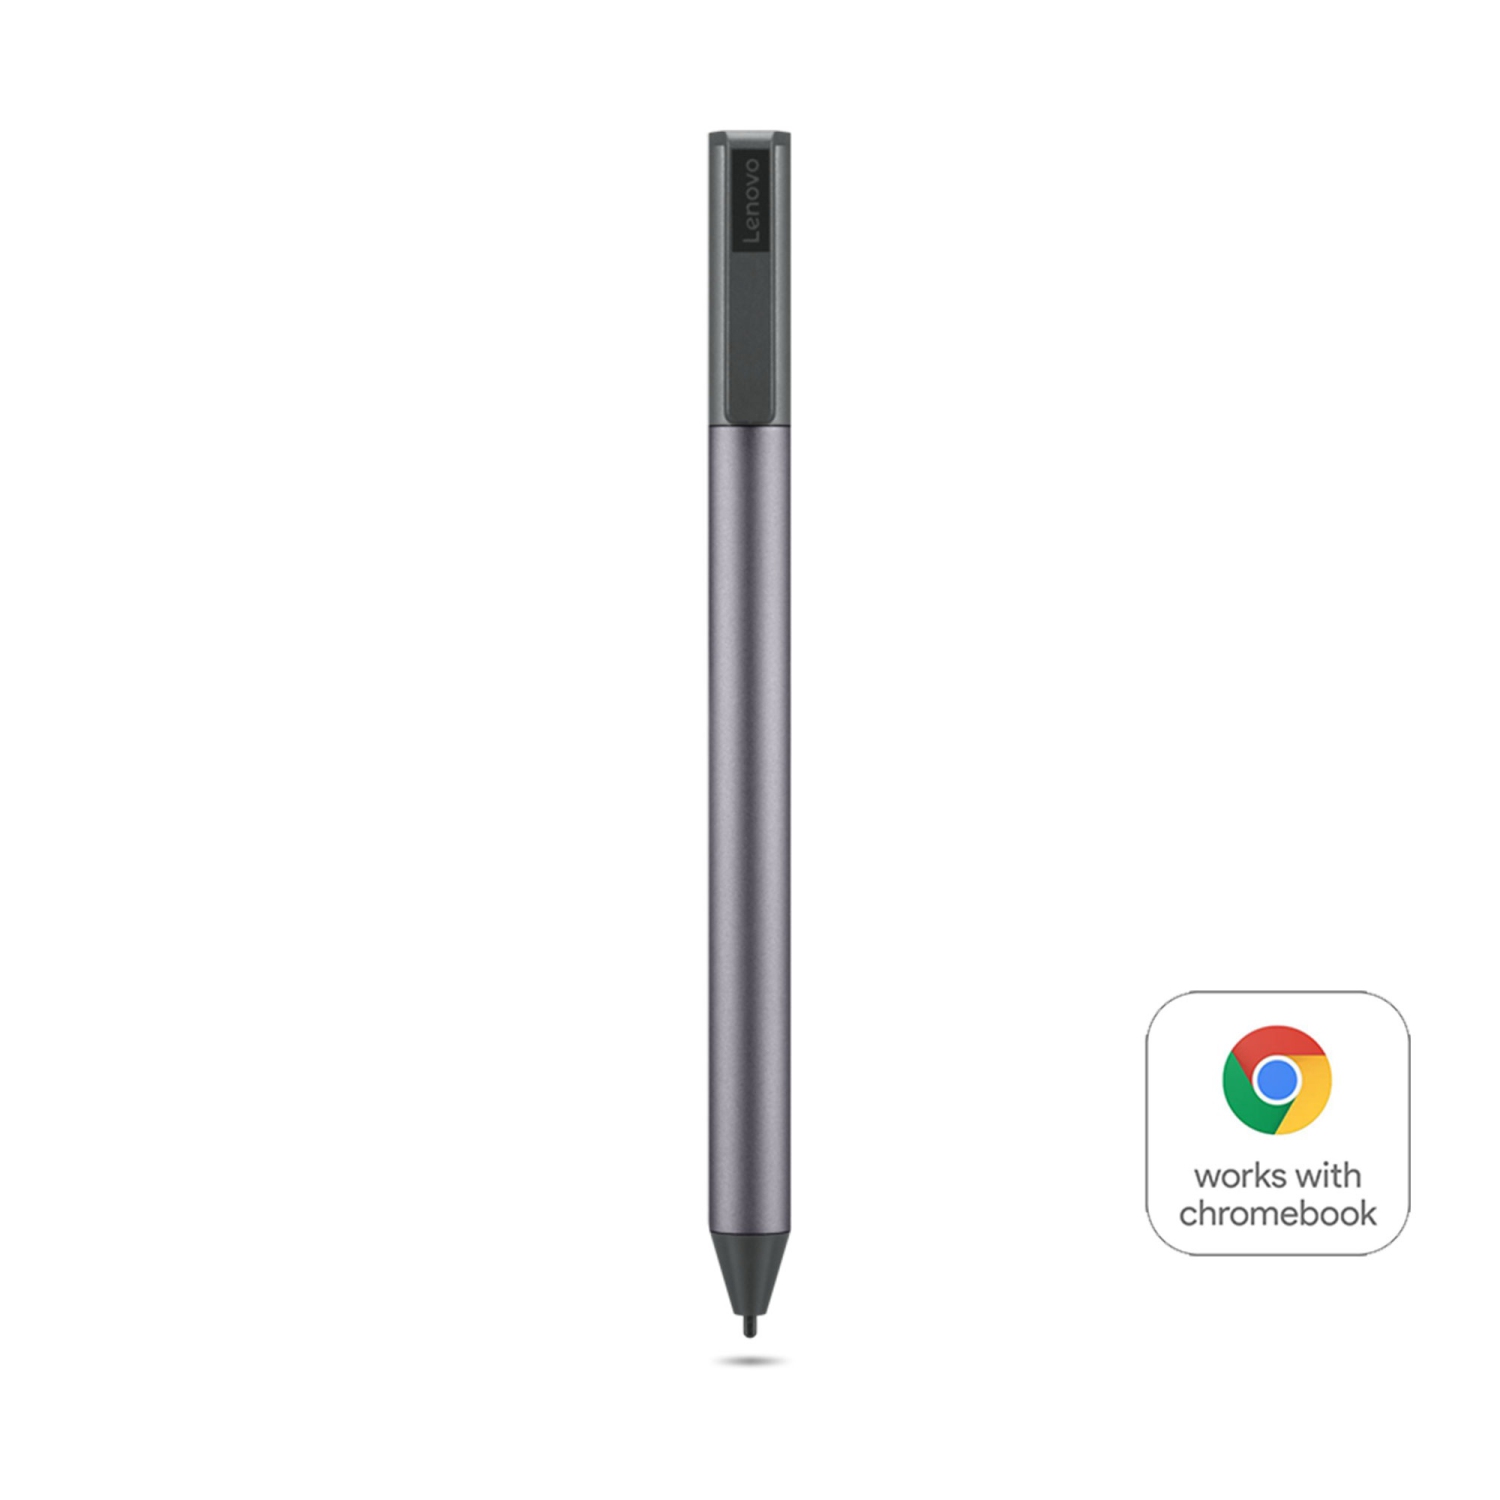 Active Stylus Pen for Lenovo ThinkPad X1 Tablet Gen 2, Touch-Control and  Type-C Rechargeable Digital Pen for Lenovo ThinkPad X1 Tablet Gen 2,Good at